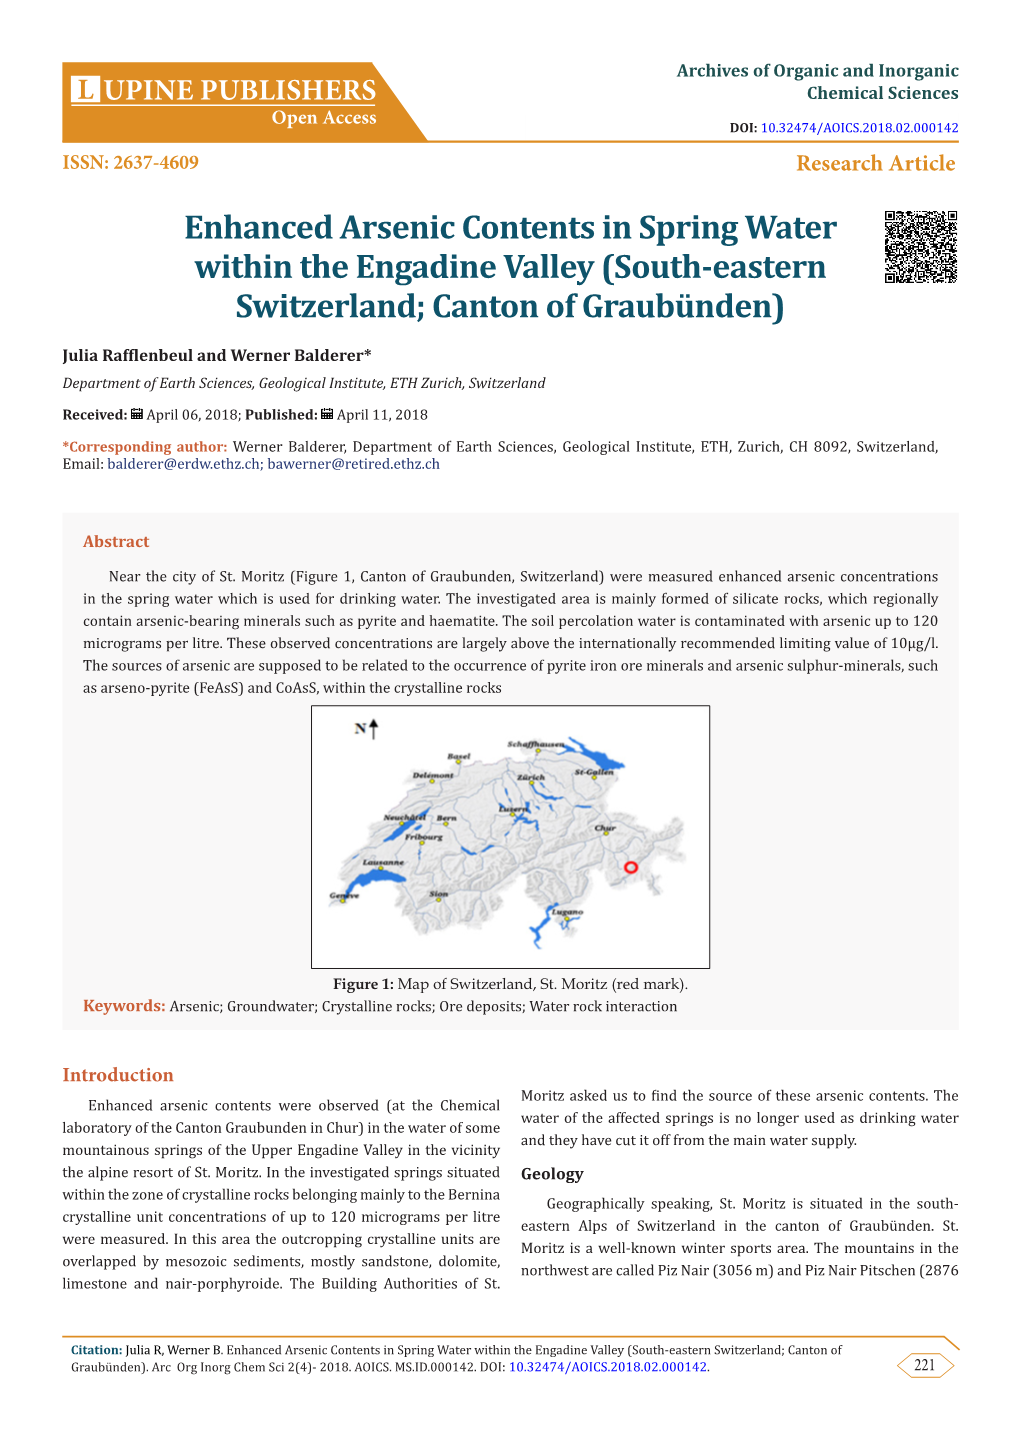 Enhanced Arsenic Contents in Spring Water Within the Engadine Valley (South-Eastern Switzerland; Canton of Graubünden)